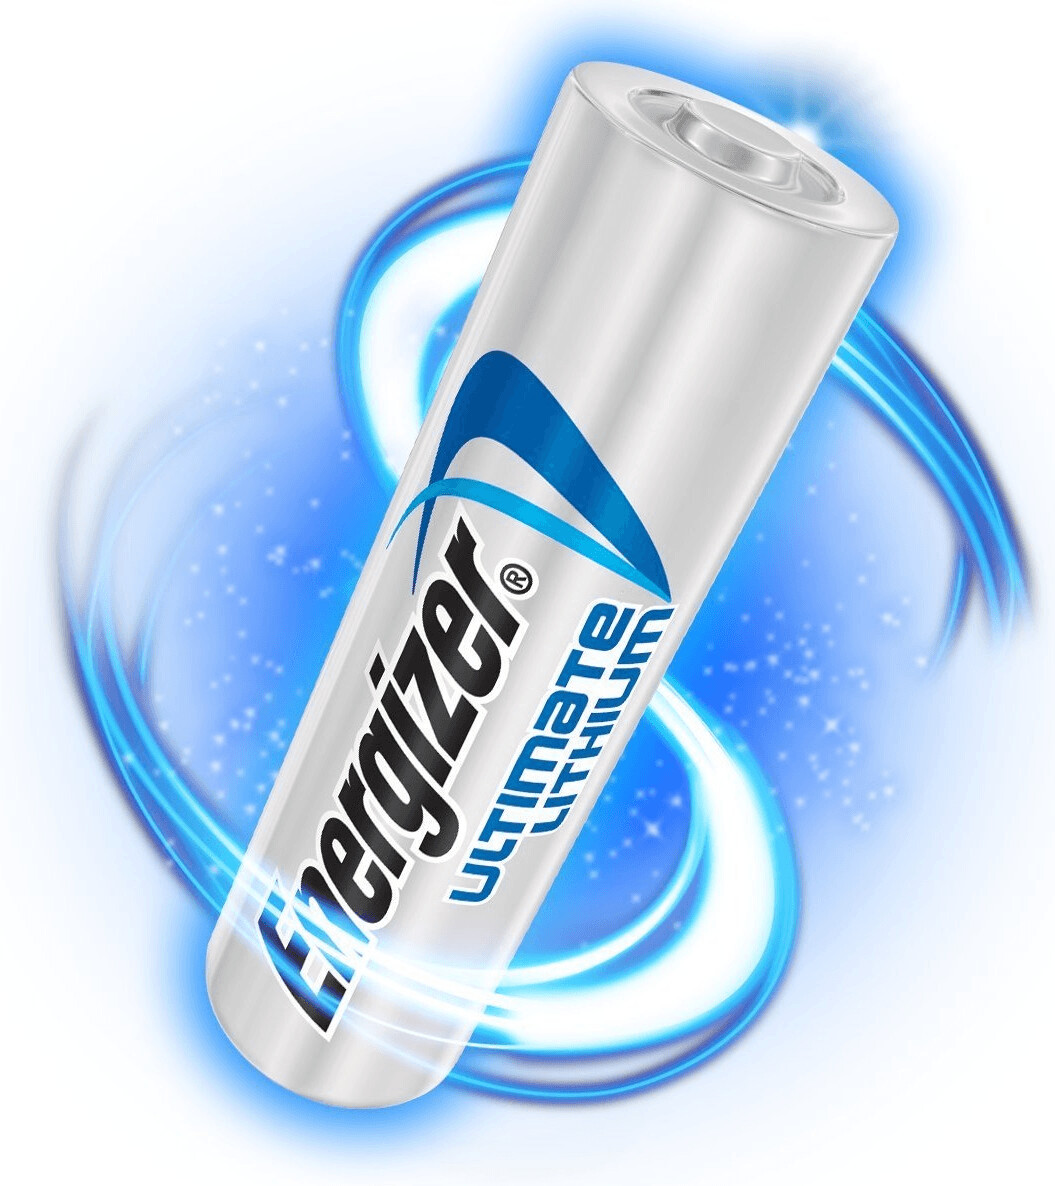 ENERGIZER Pile Ultimate Lithium AAA LR03, pack de 4 piles ≡ CALIPAGE